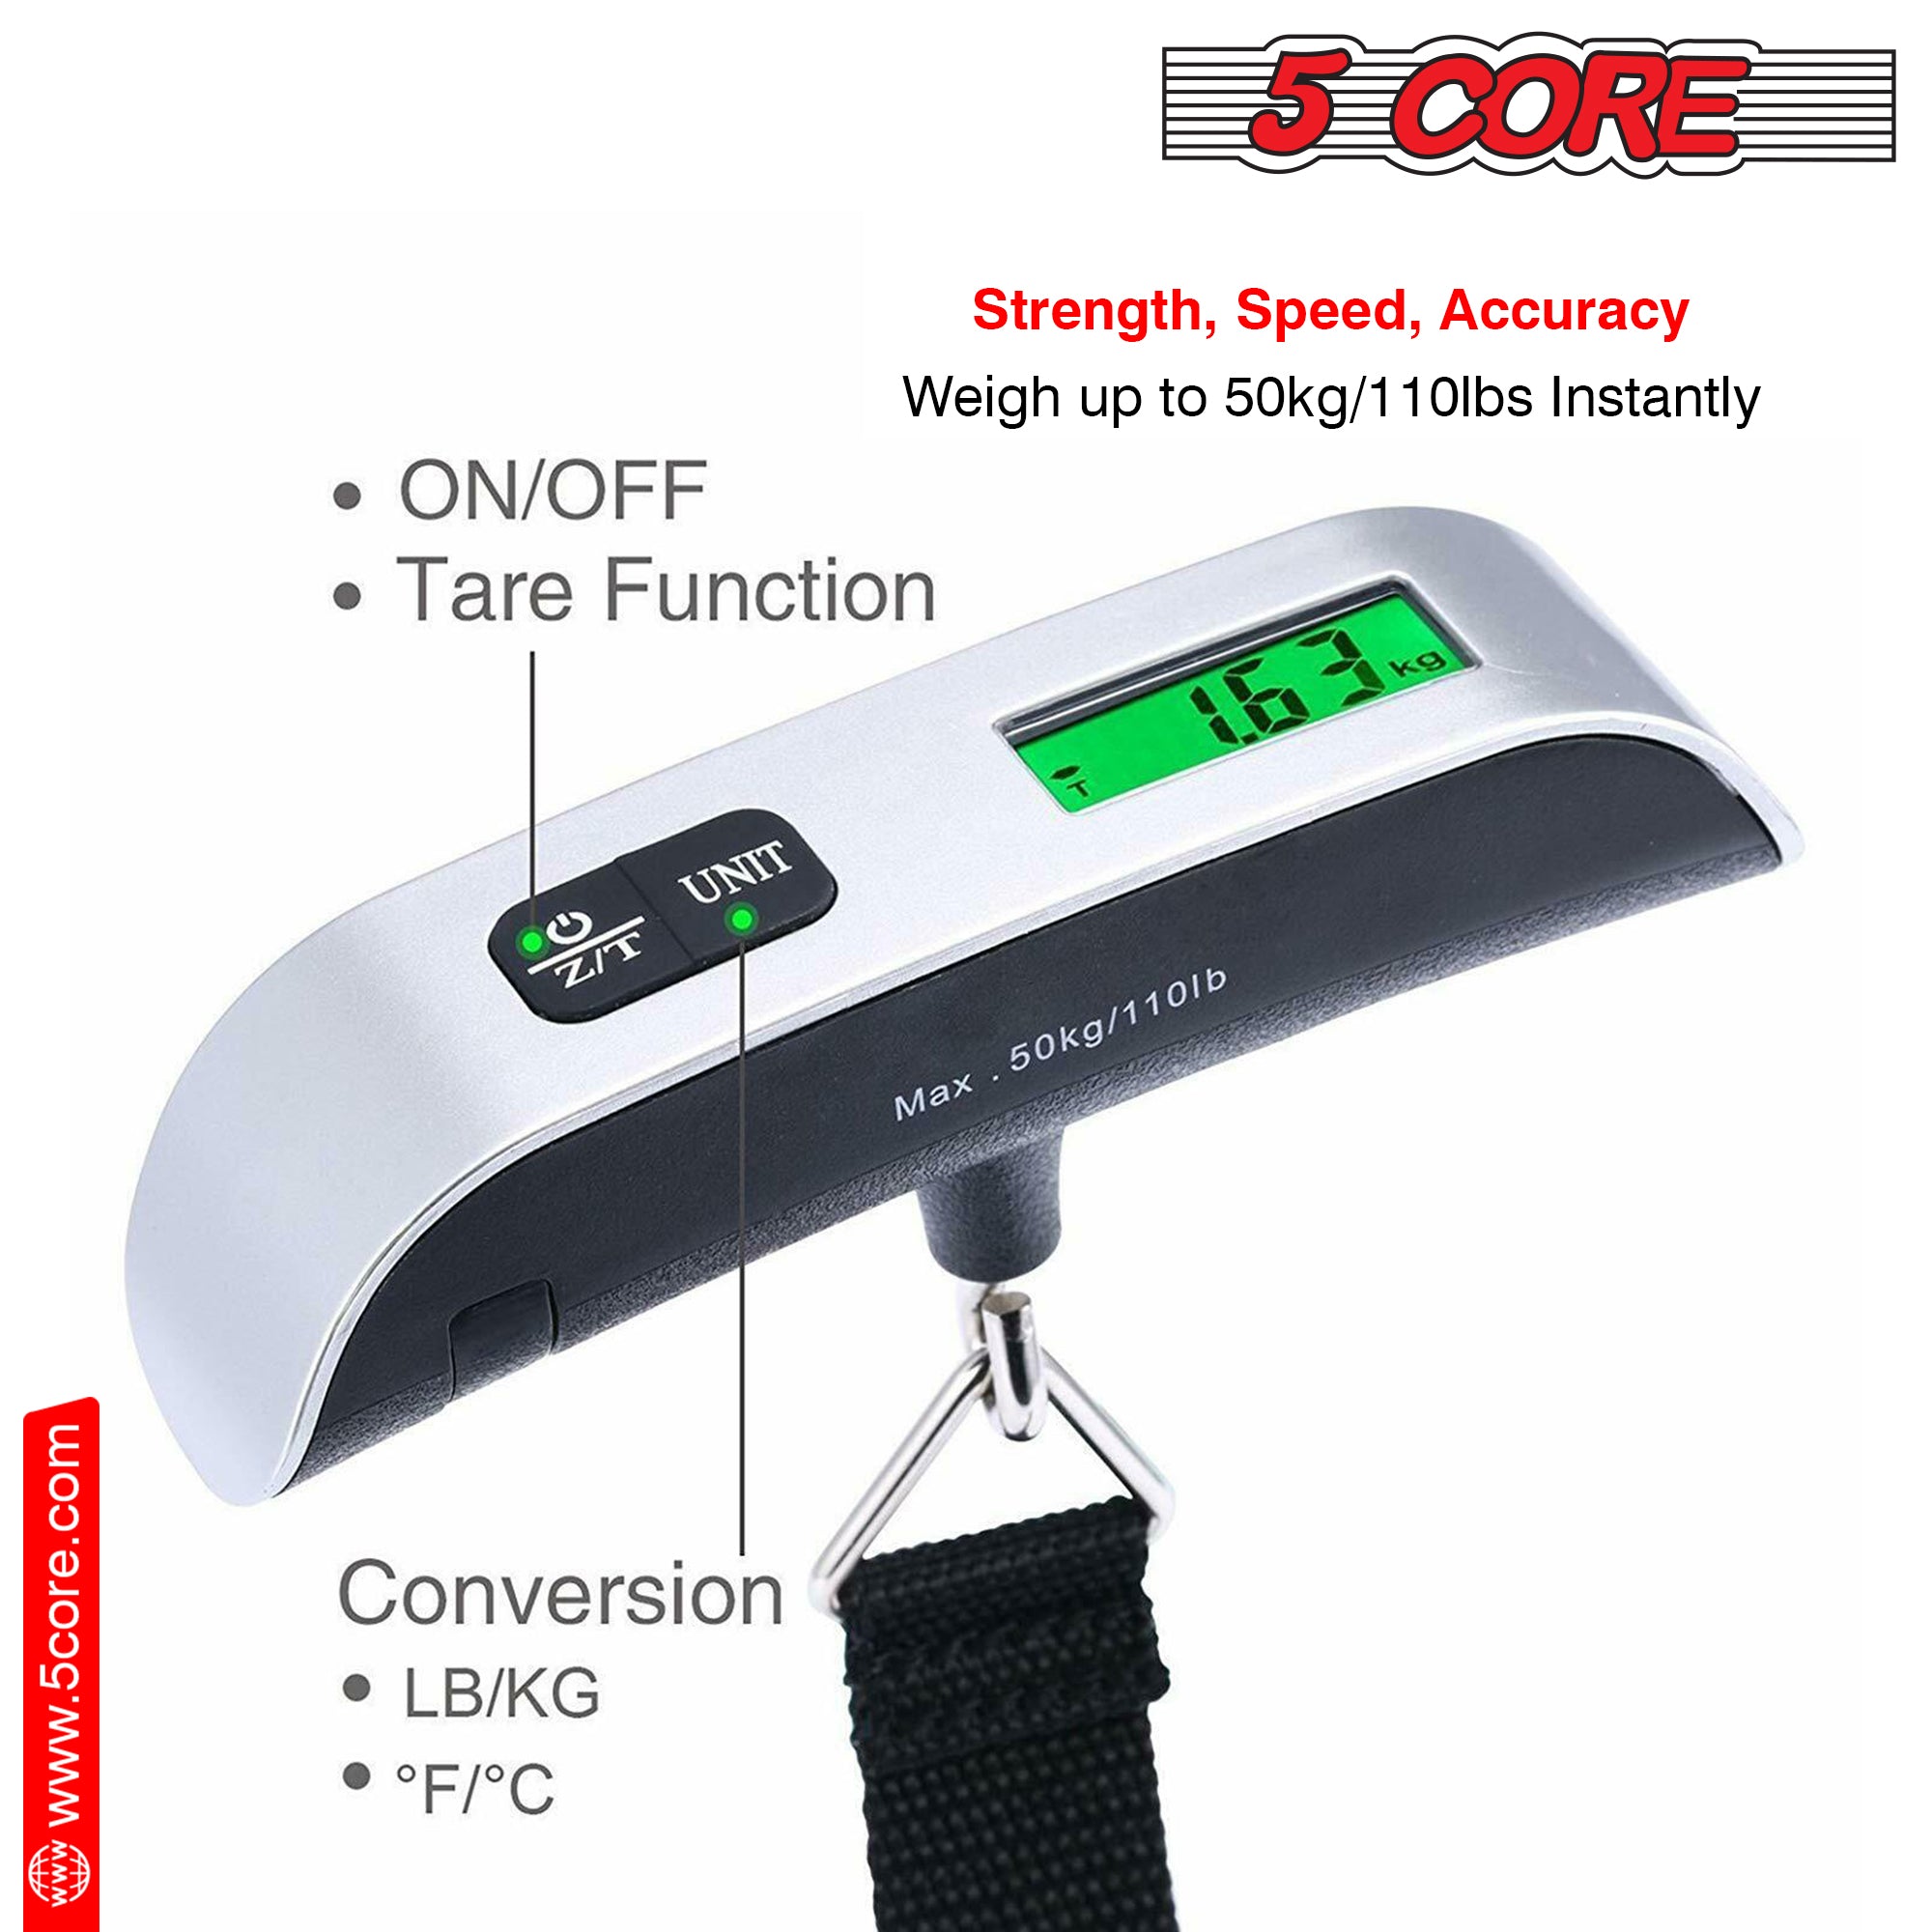 Travel Scale for Accurate Weighing Compact & Portable- 5 Core